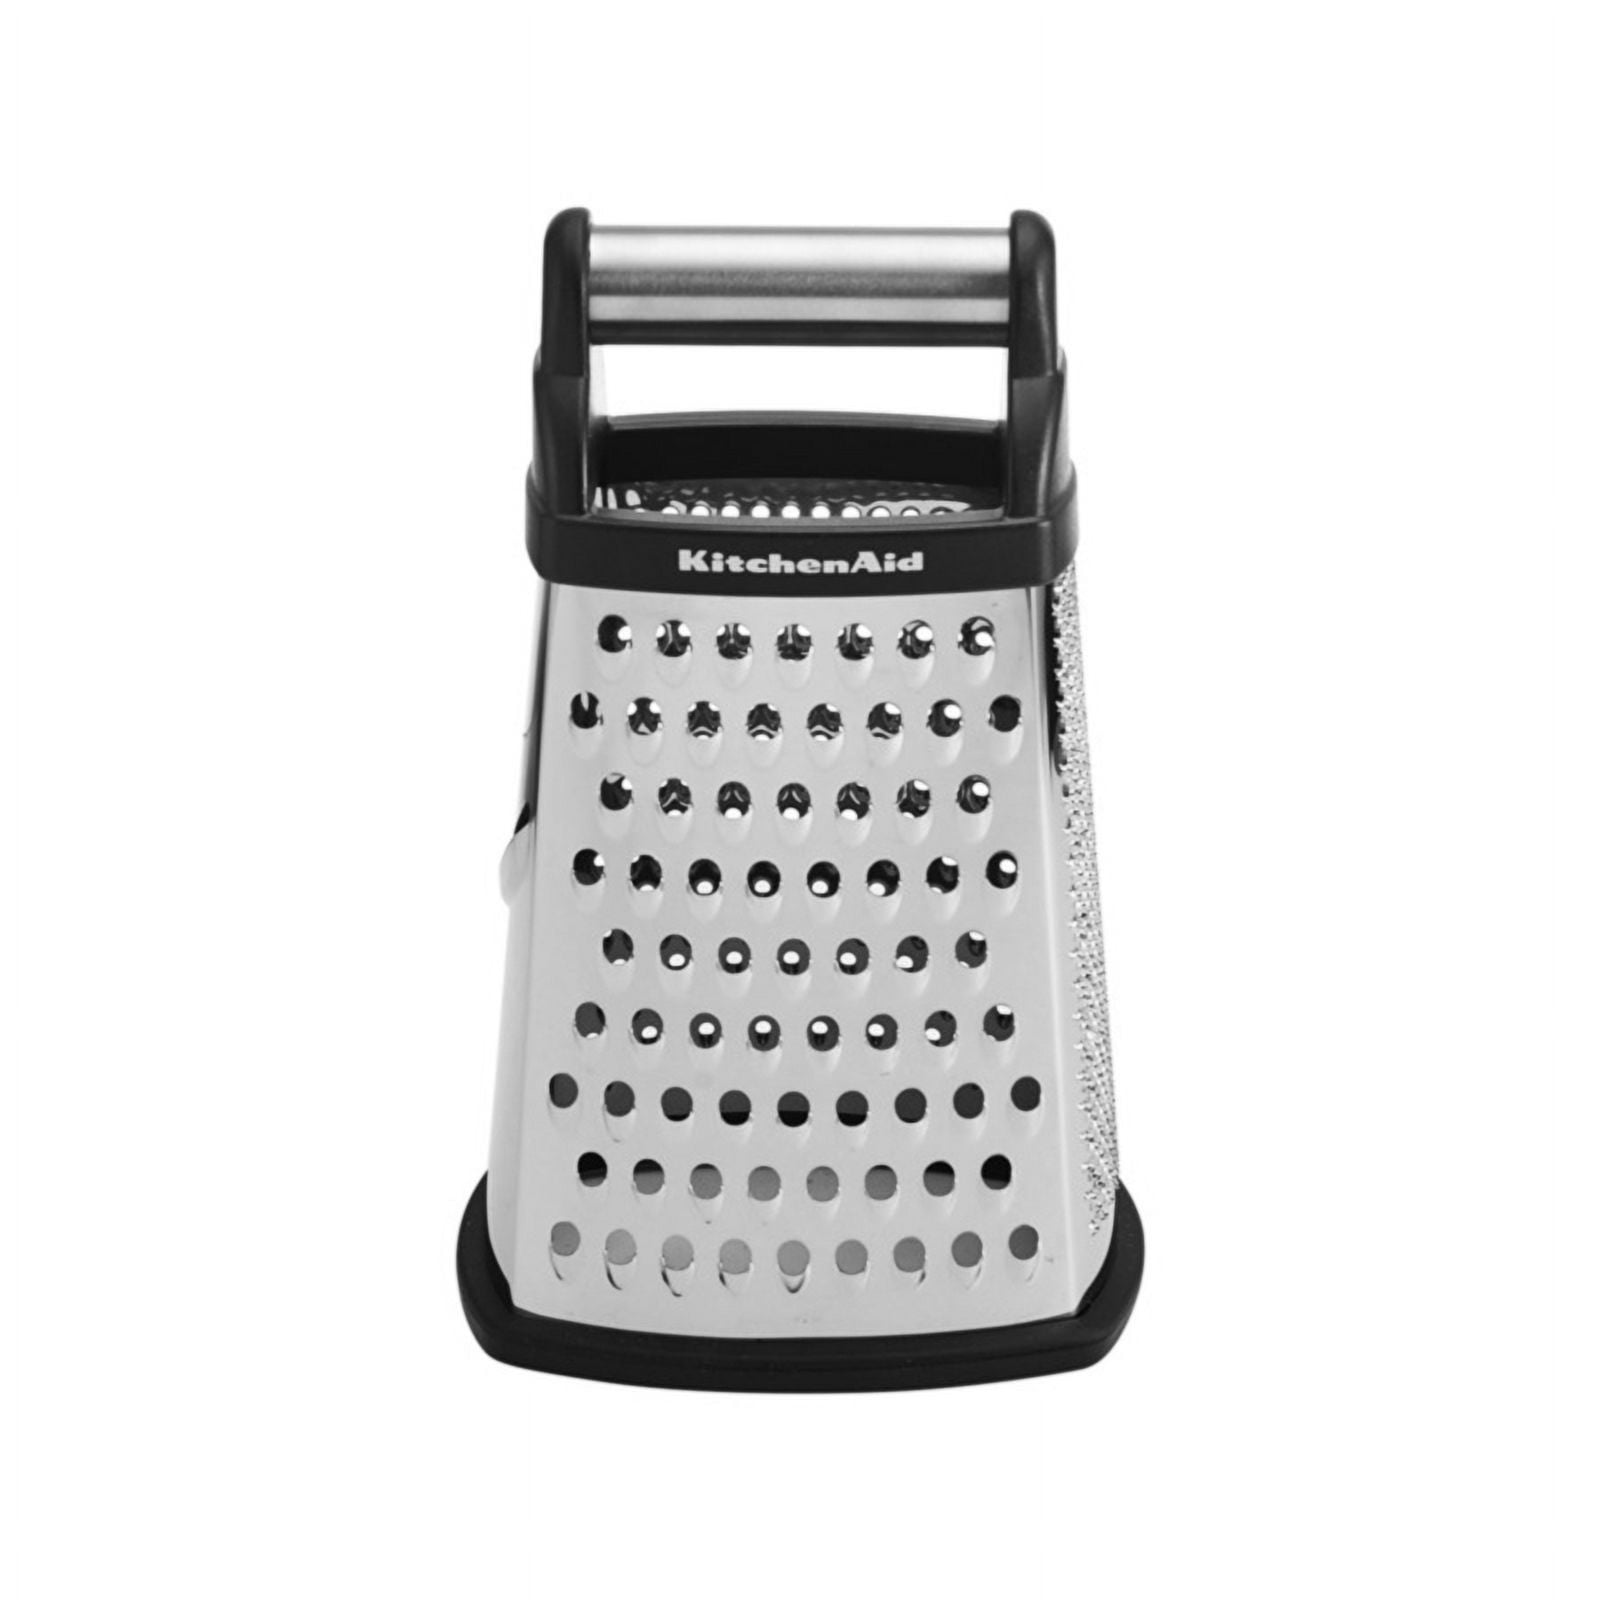 6009285 6.25 x 5.25 in. Black & Silver Stainless Steel Box Grater -  Kitchenaid